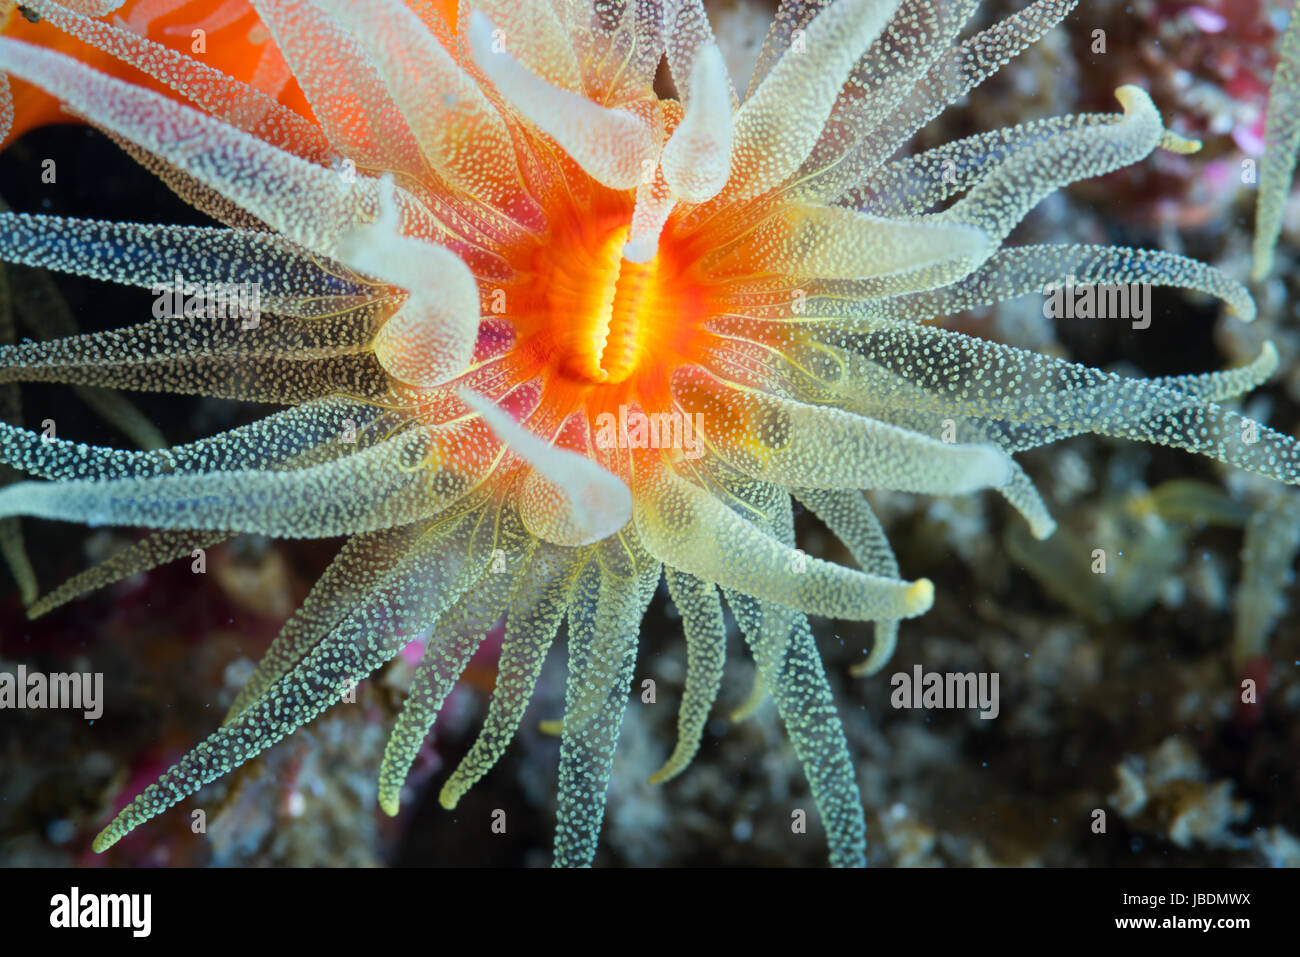 Orange Cup Coral (Tubastraea sp.)  Depth of water 18m at Owase, Mie, Japan Stock Photo